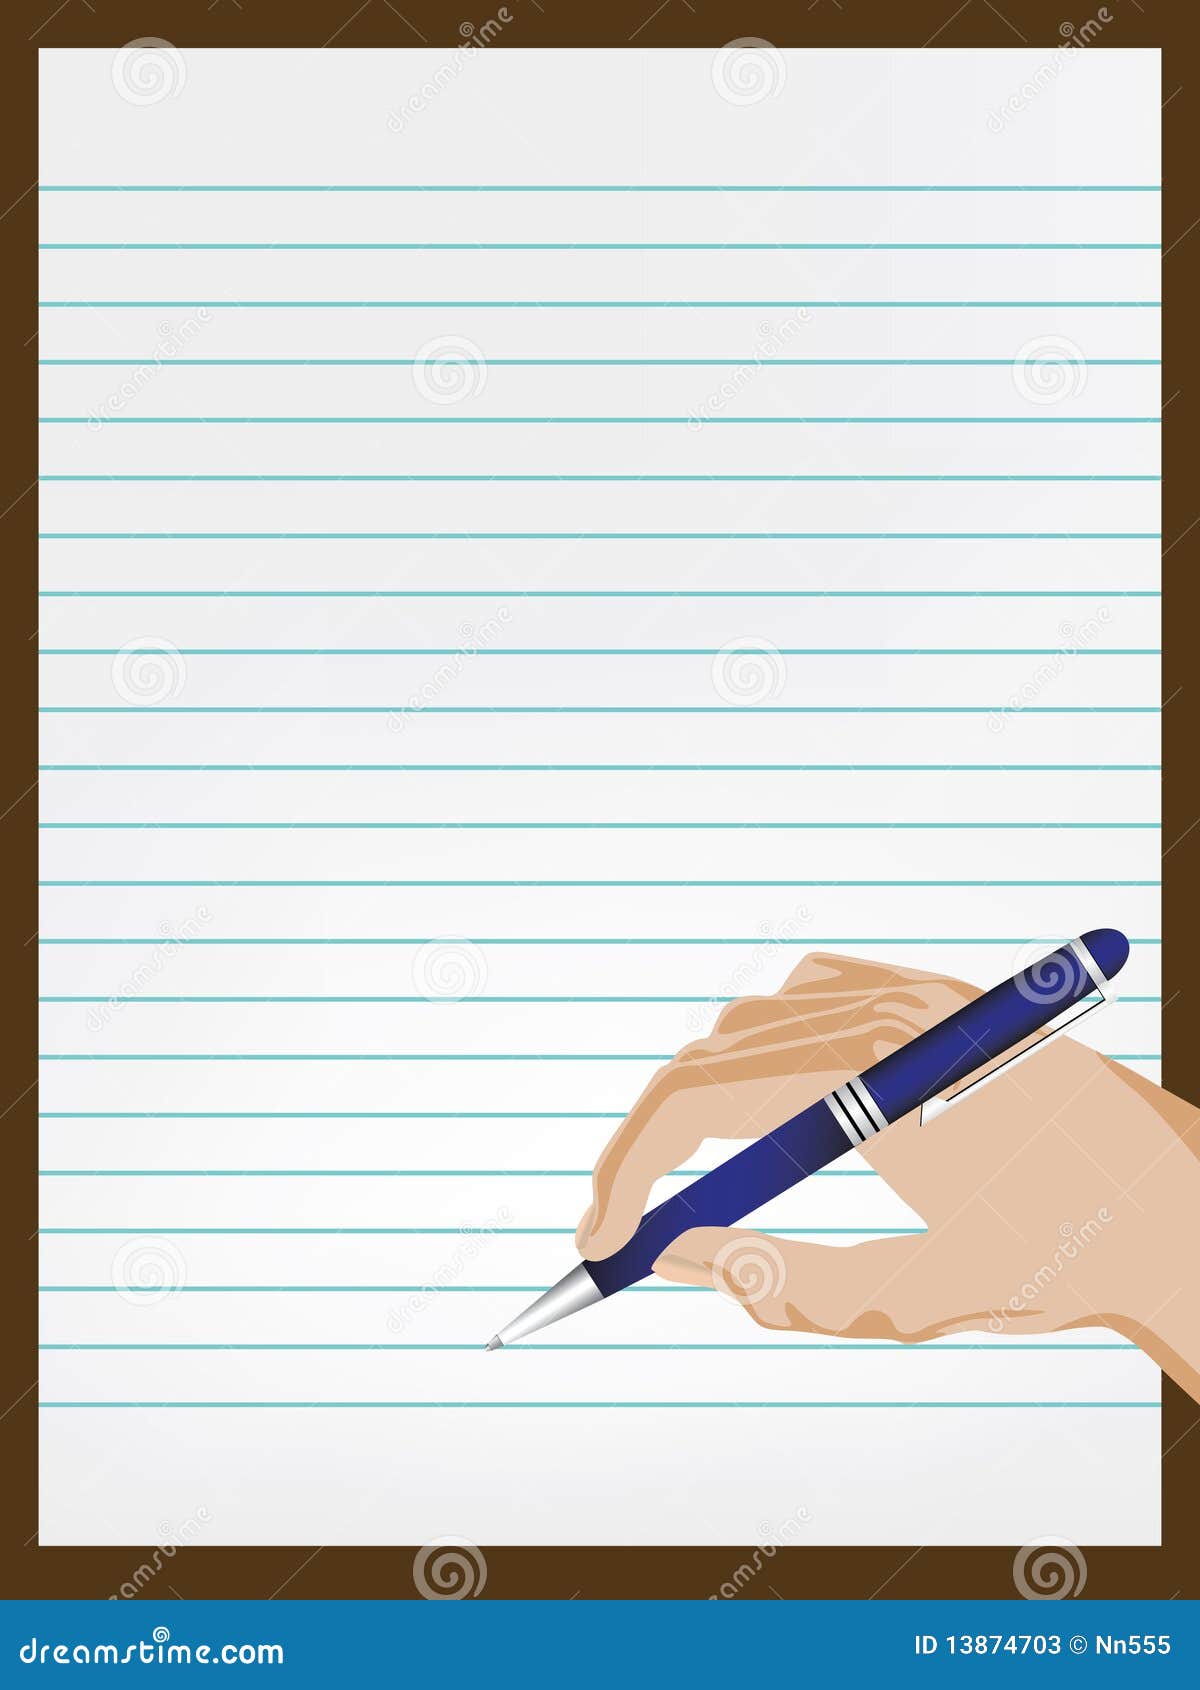 Paper with writing